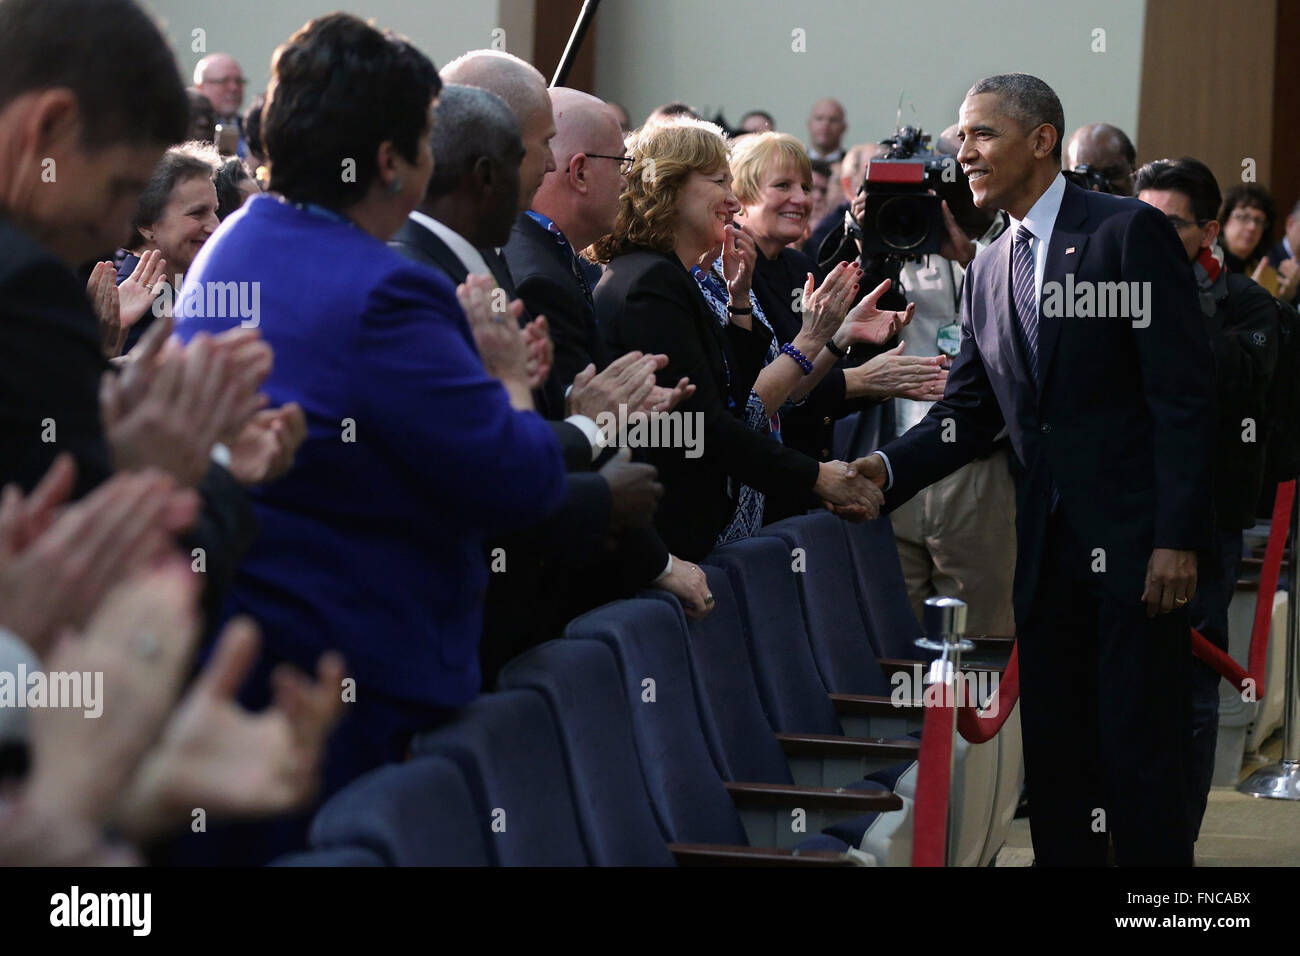 Washington, District of Columbia, USA. 14th Mar, 2016. United States President Barack Obama (R) greets State Department staff after addressing the Chief of Missions Conference in the Dean Acheson Auditorium at the Harry S Truman building March 14, 2016 in Washington, DC. Obama highlighted the work and sacrifice done by the United States' diplomatic corps and talked about his administration's accomplishments. Credit: Chip Somodevilla/Pool via CNP Credit:  Chip Somodevilla/CNP/ZUMA Wire/Alamy Live News Stock Photo